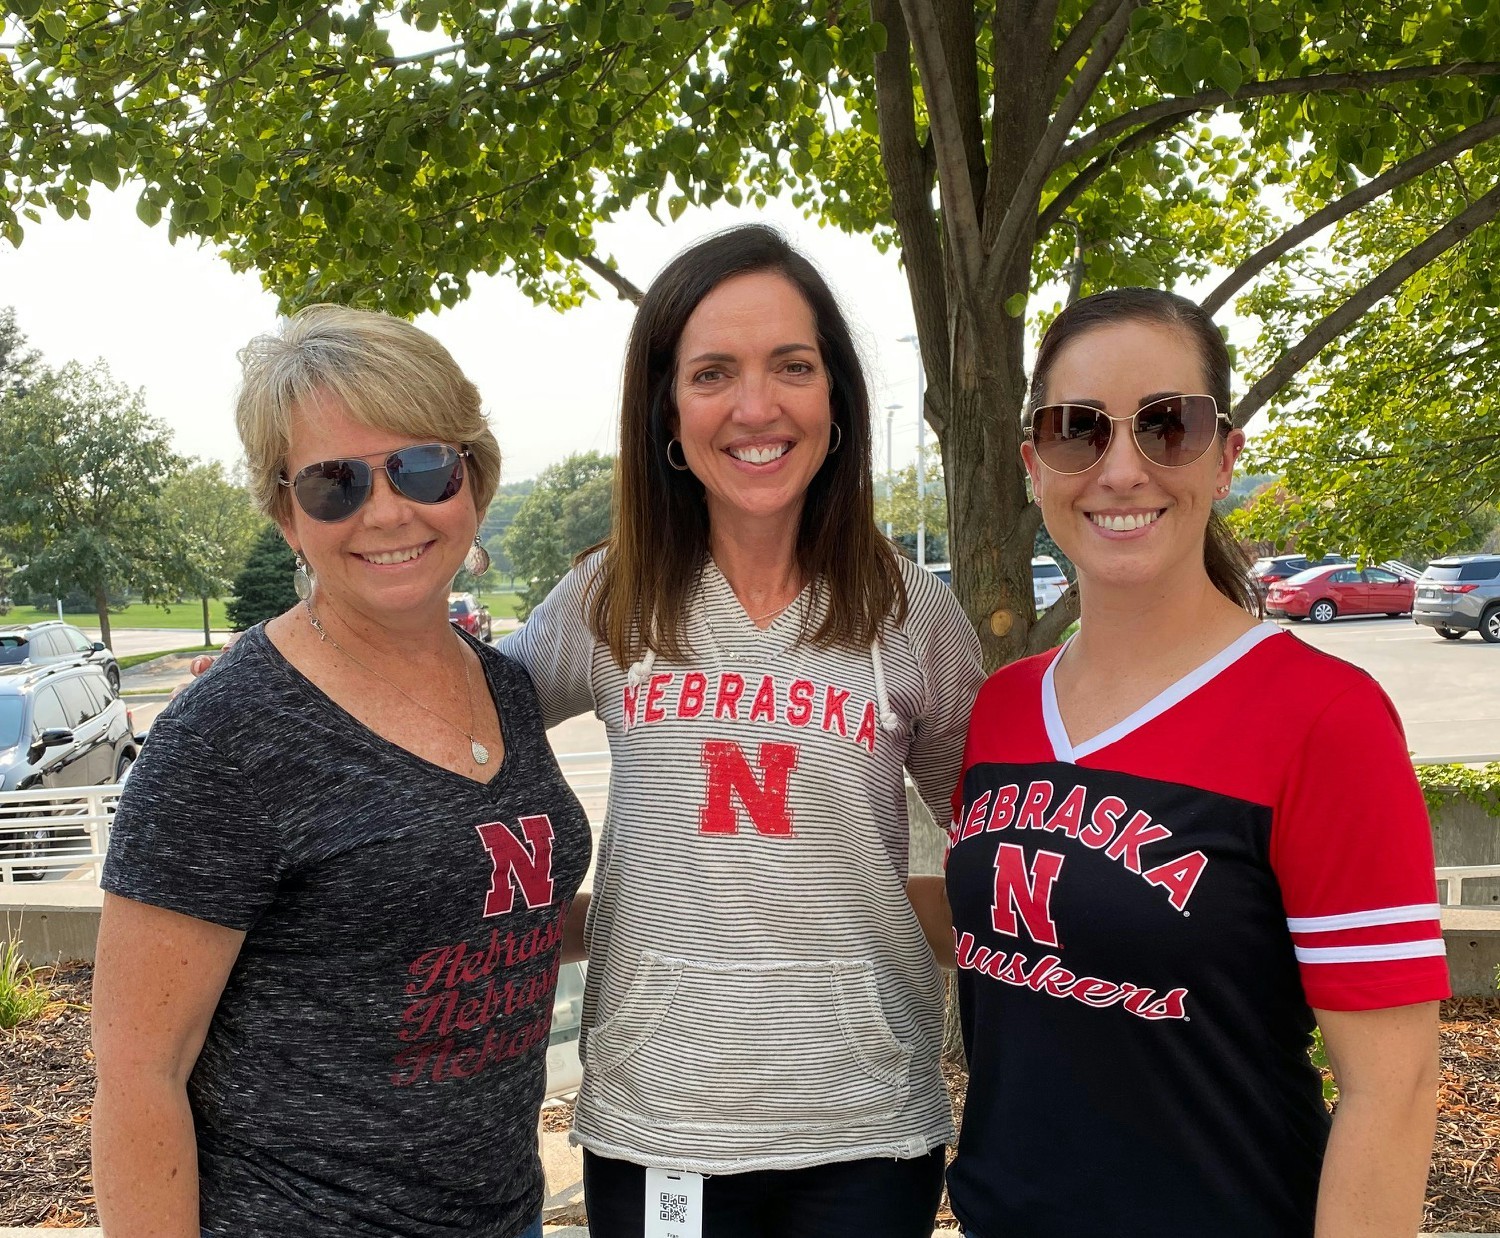 Talent Plus colleagues celebrate the Cornhusker football season with an annual tailgate